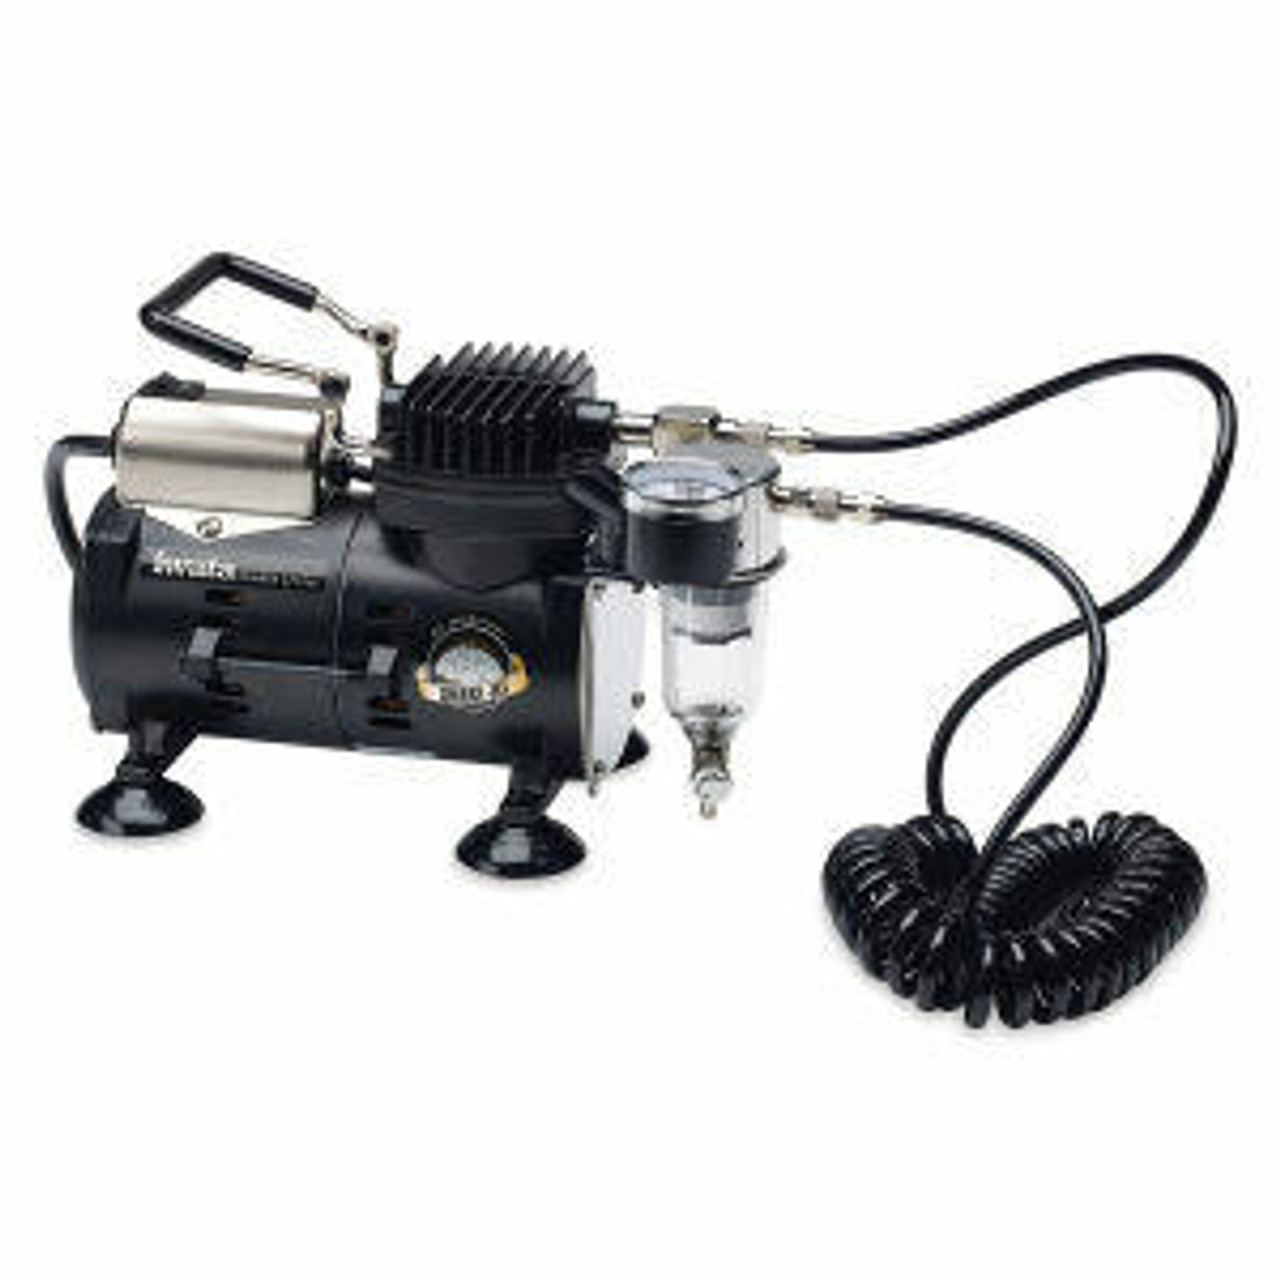 Iwata Textile Airbrush Kit with Power Jet Pro compressor